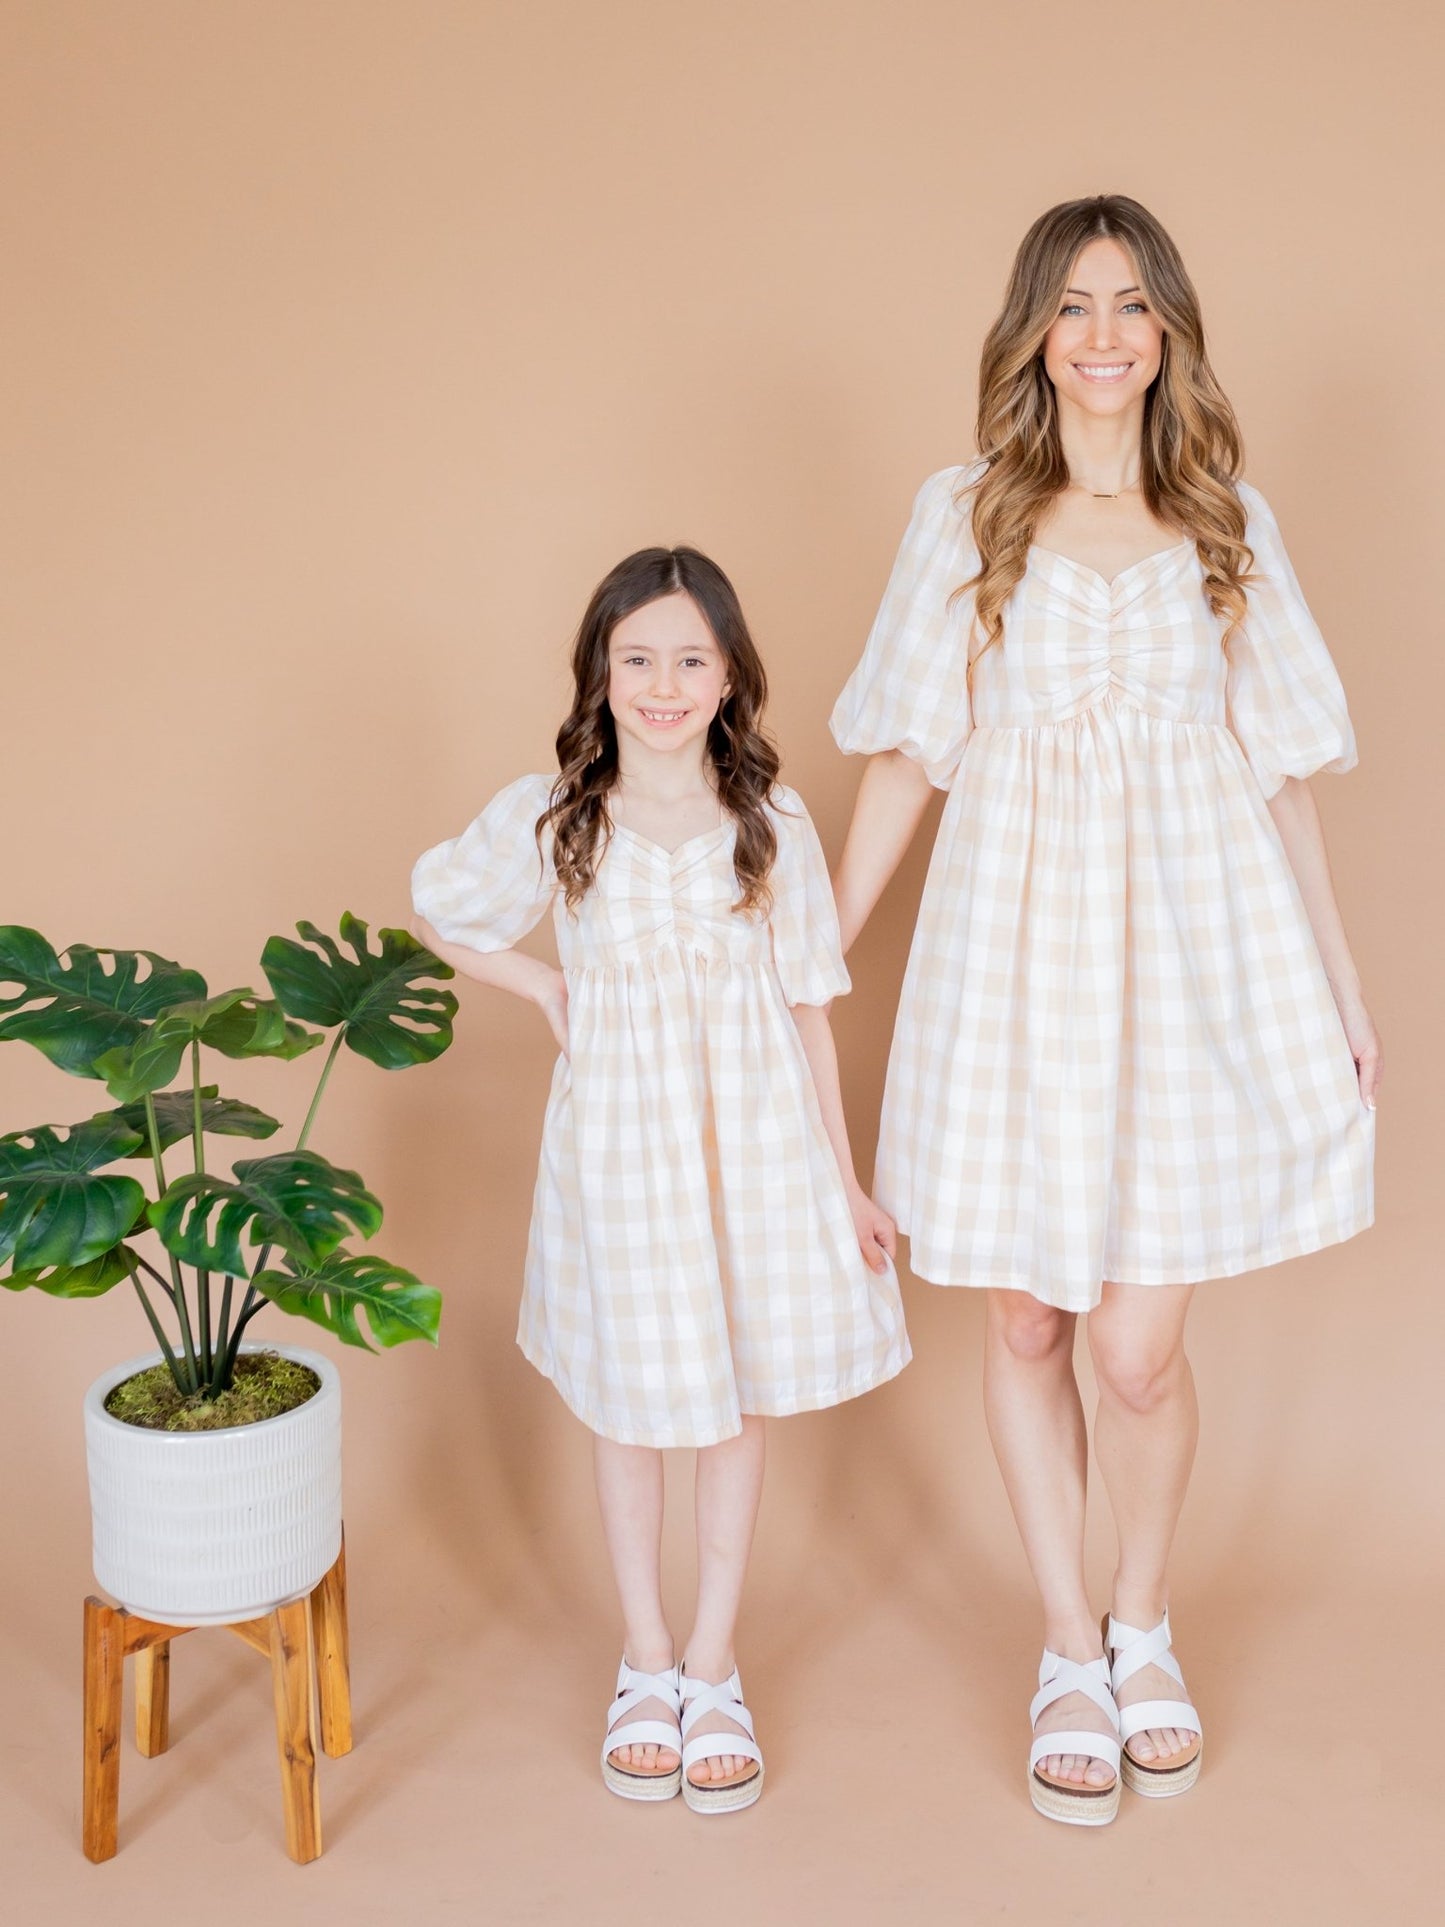 Belle Mommy & Me Matching Dresses - LITTLE MIA BELLA